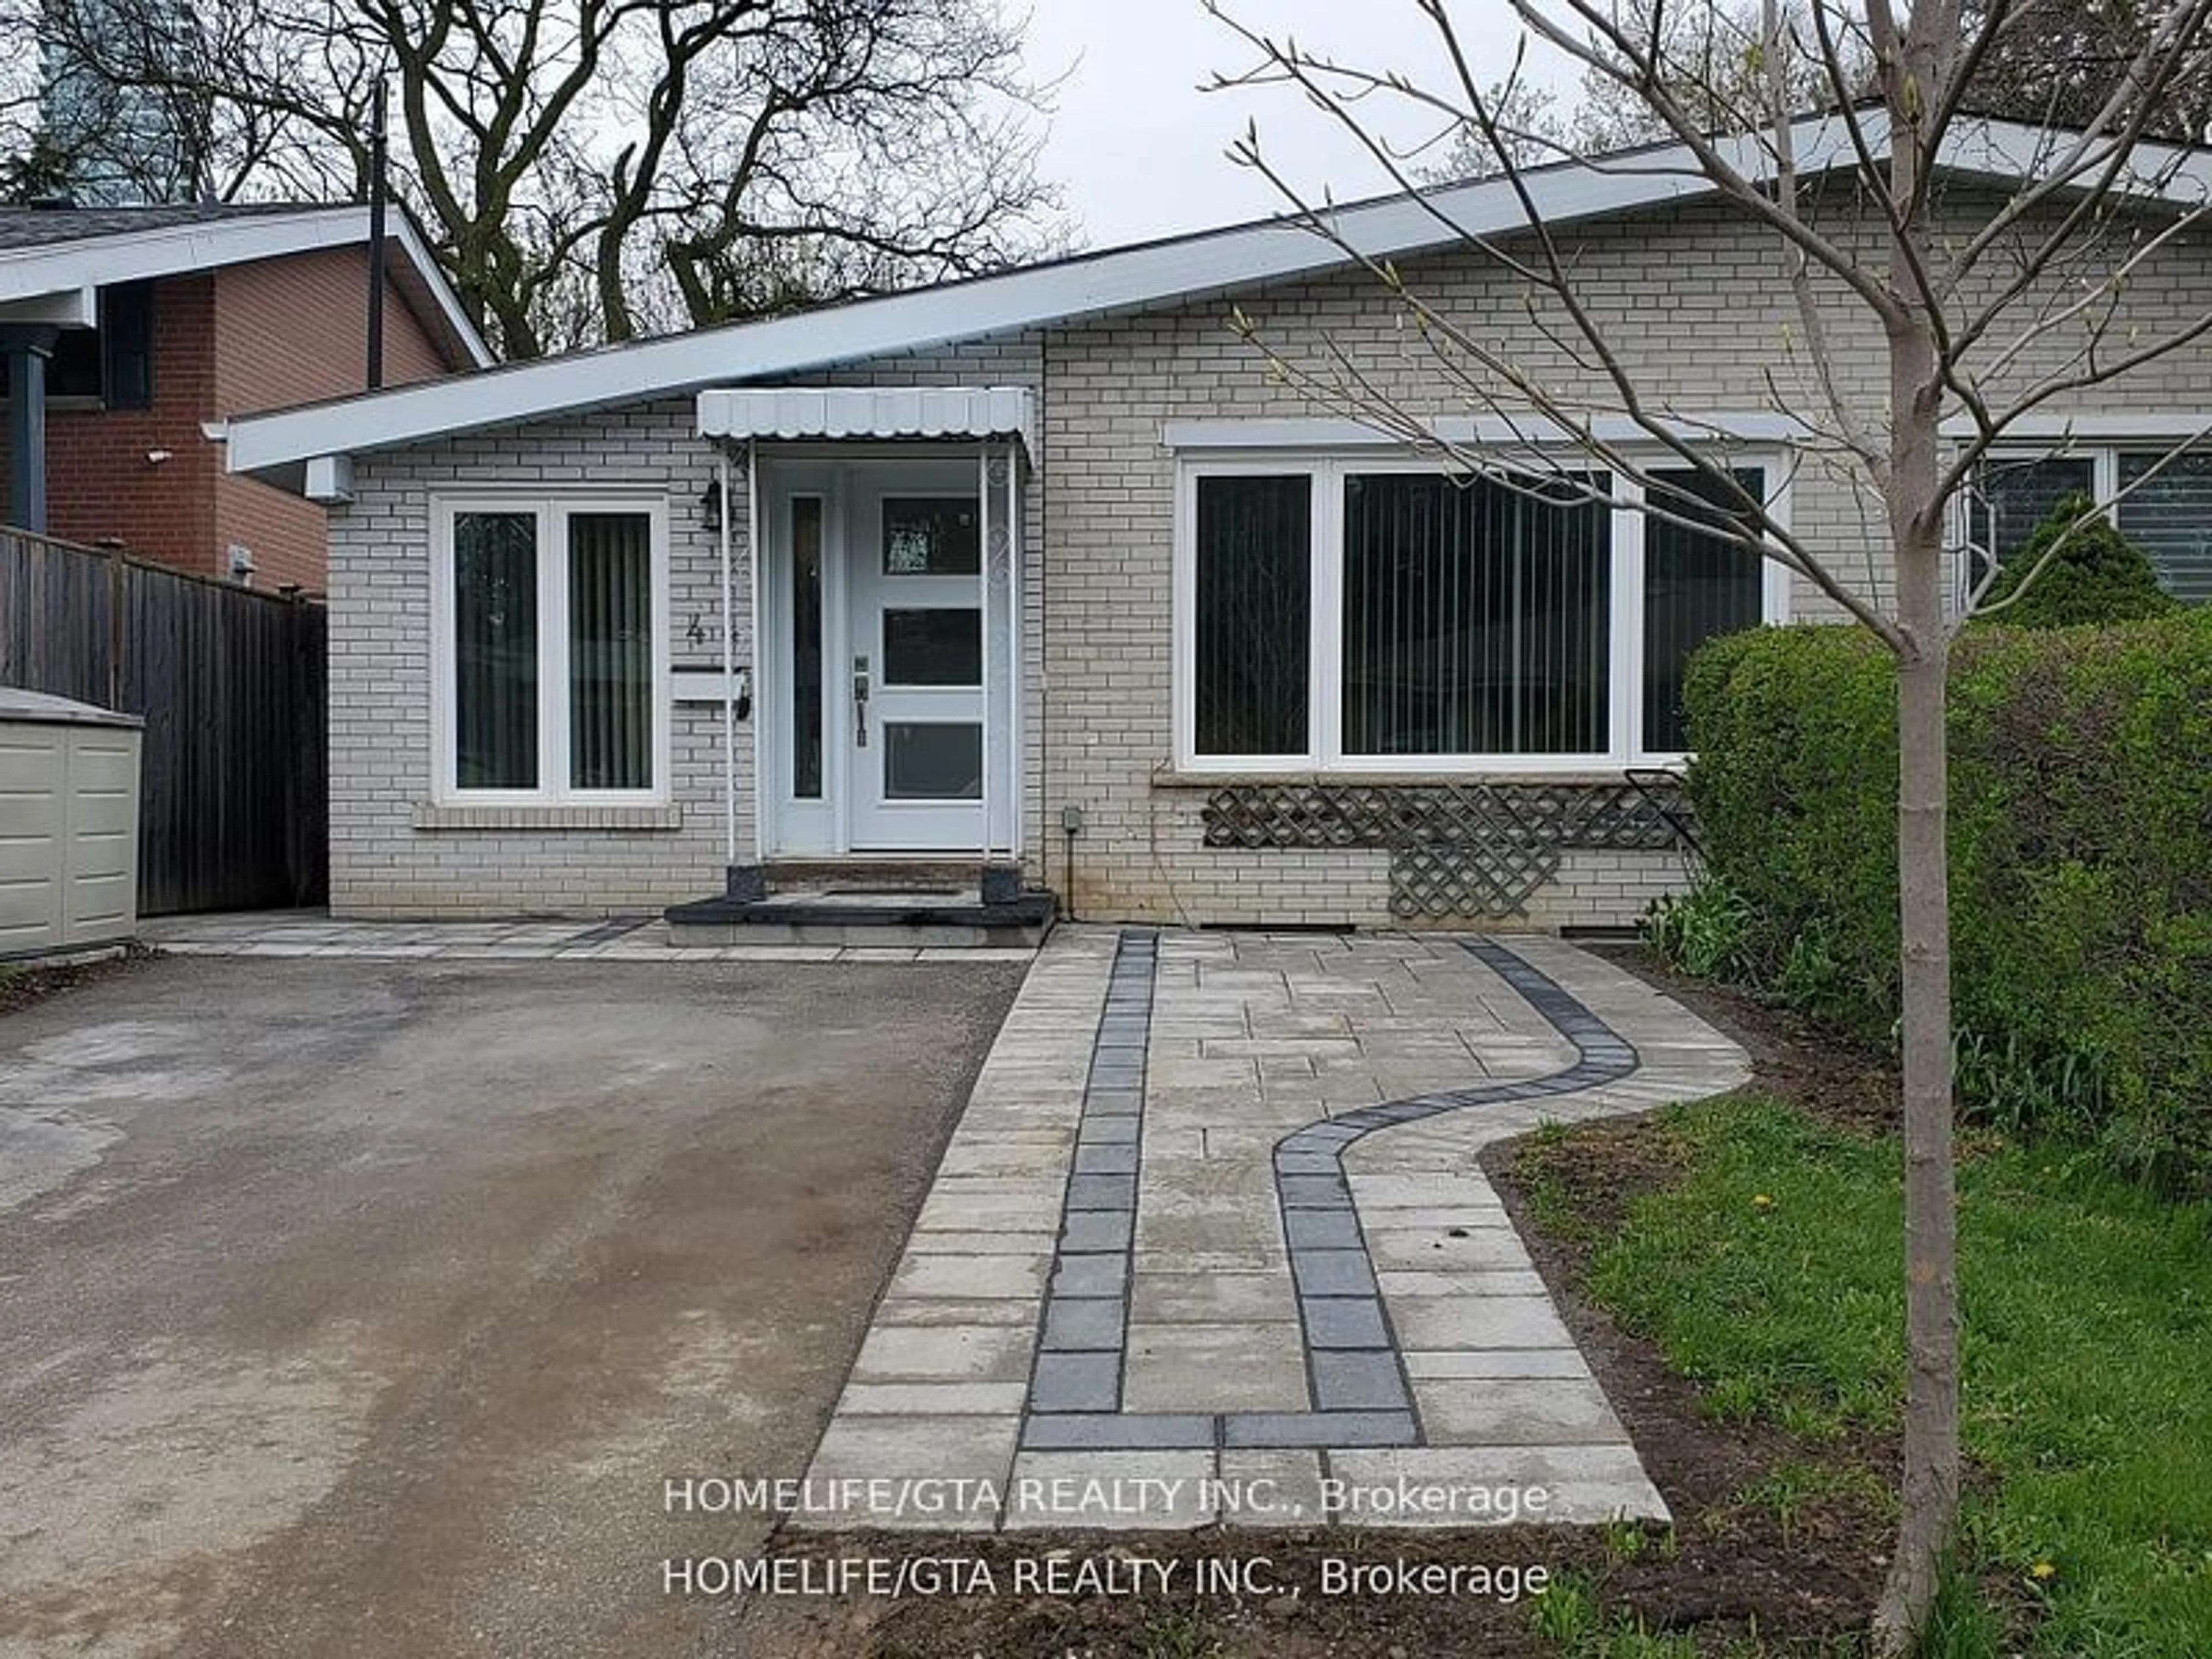 Home with brick exterior material for 44 Northey Dr, Toronto Ontario M2L 2S9